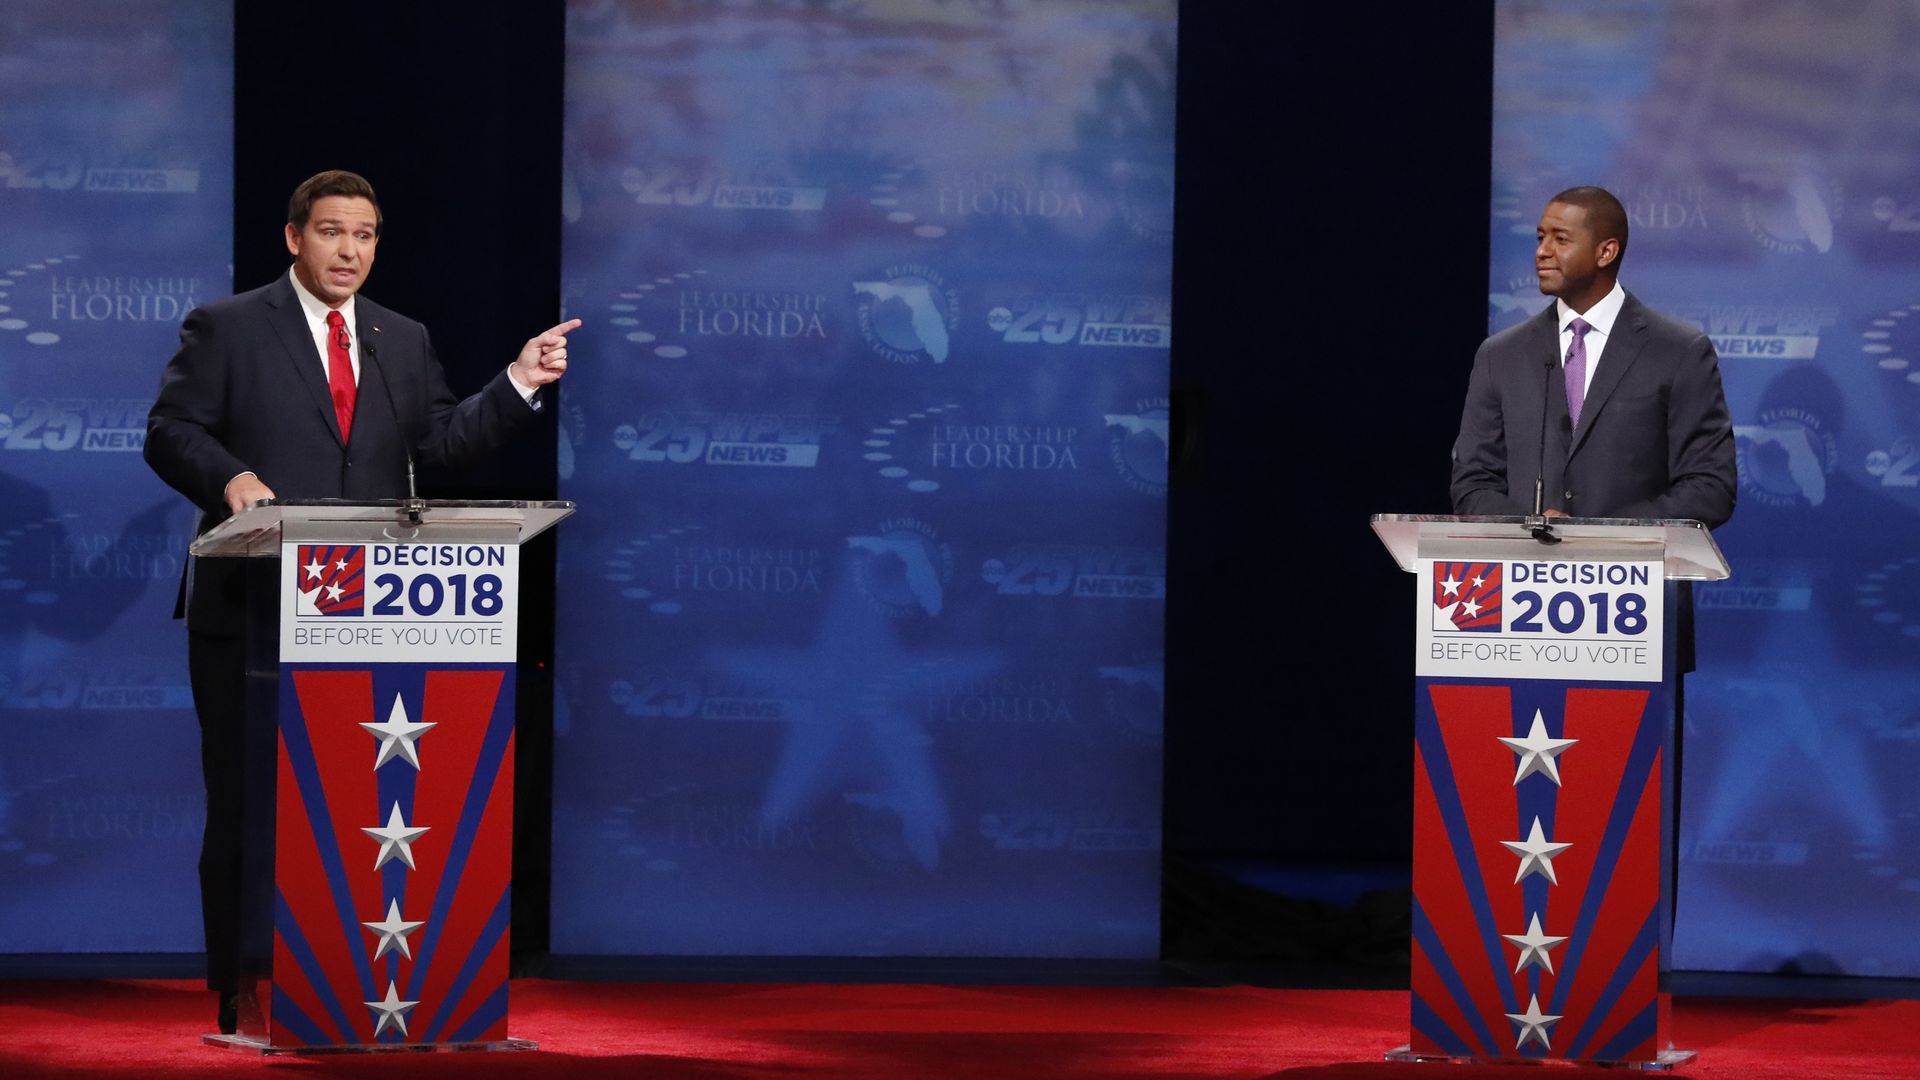 Ron DeSantis and Andrew Gillum on a debate stage.